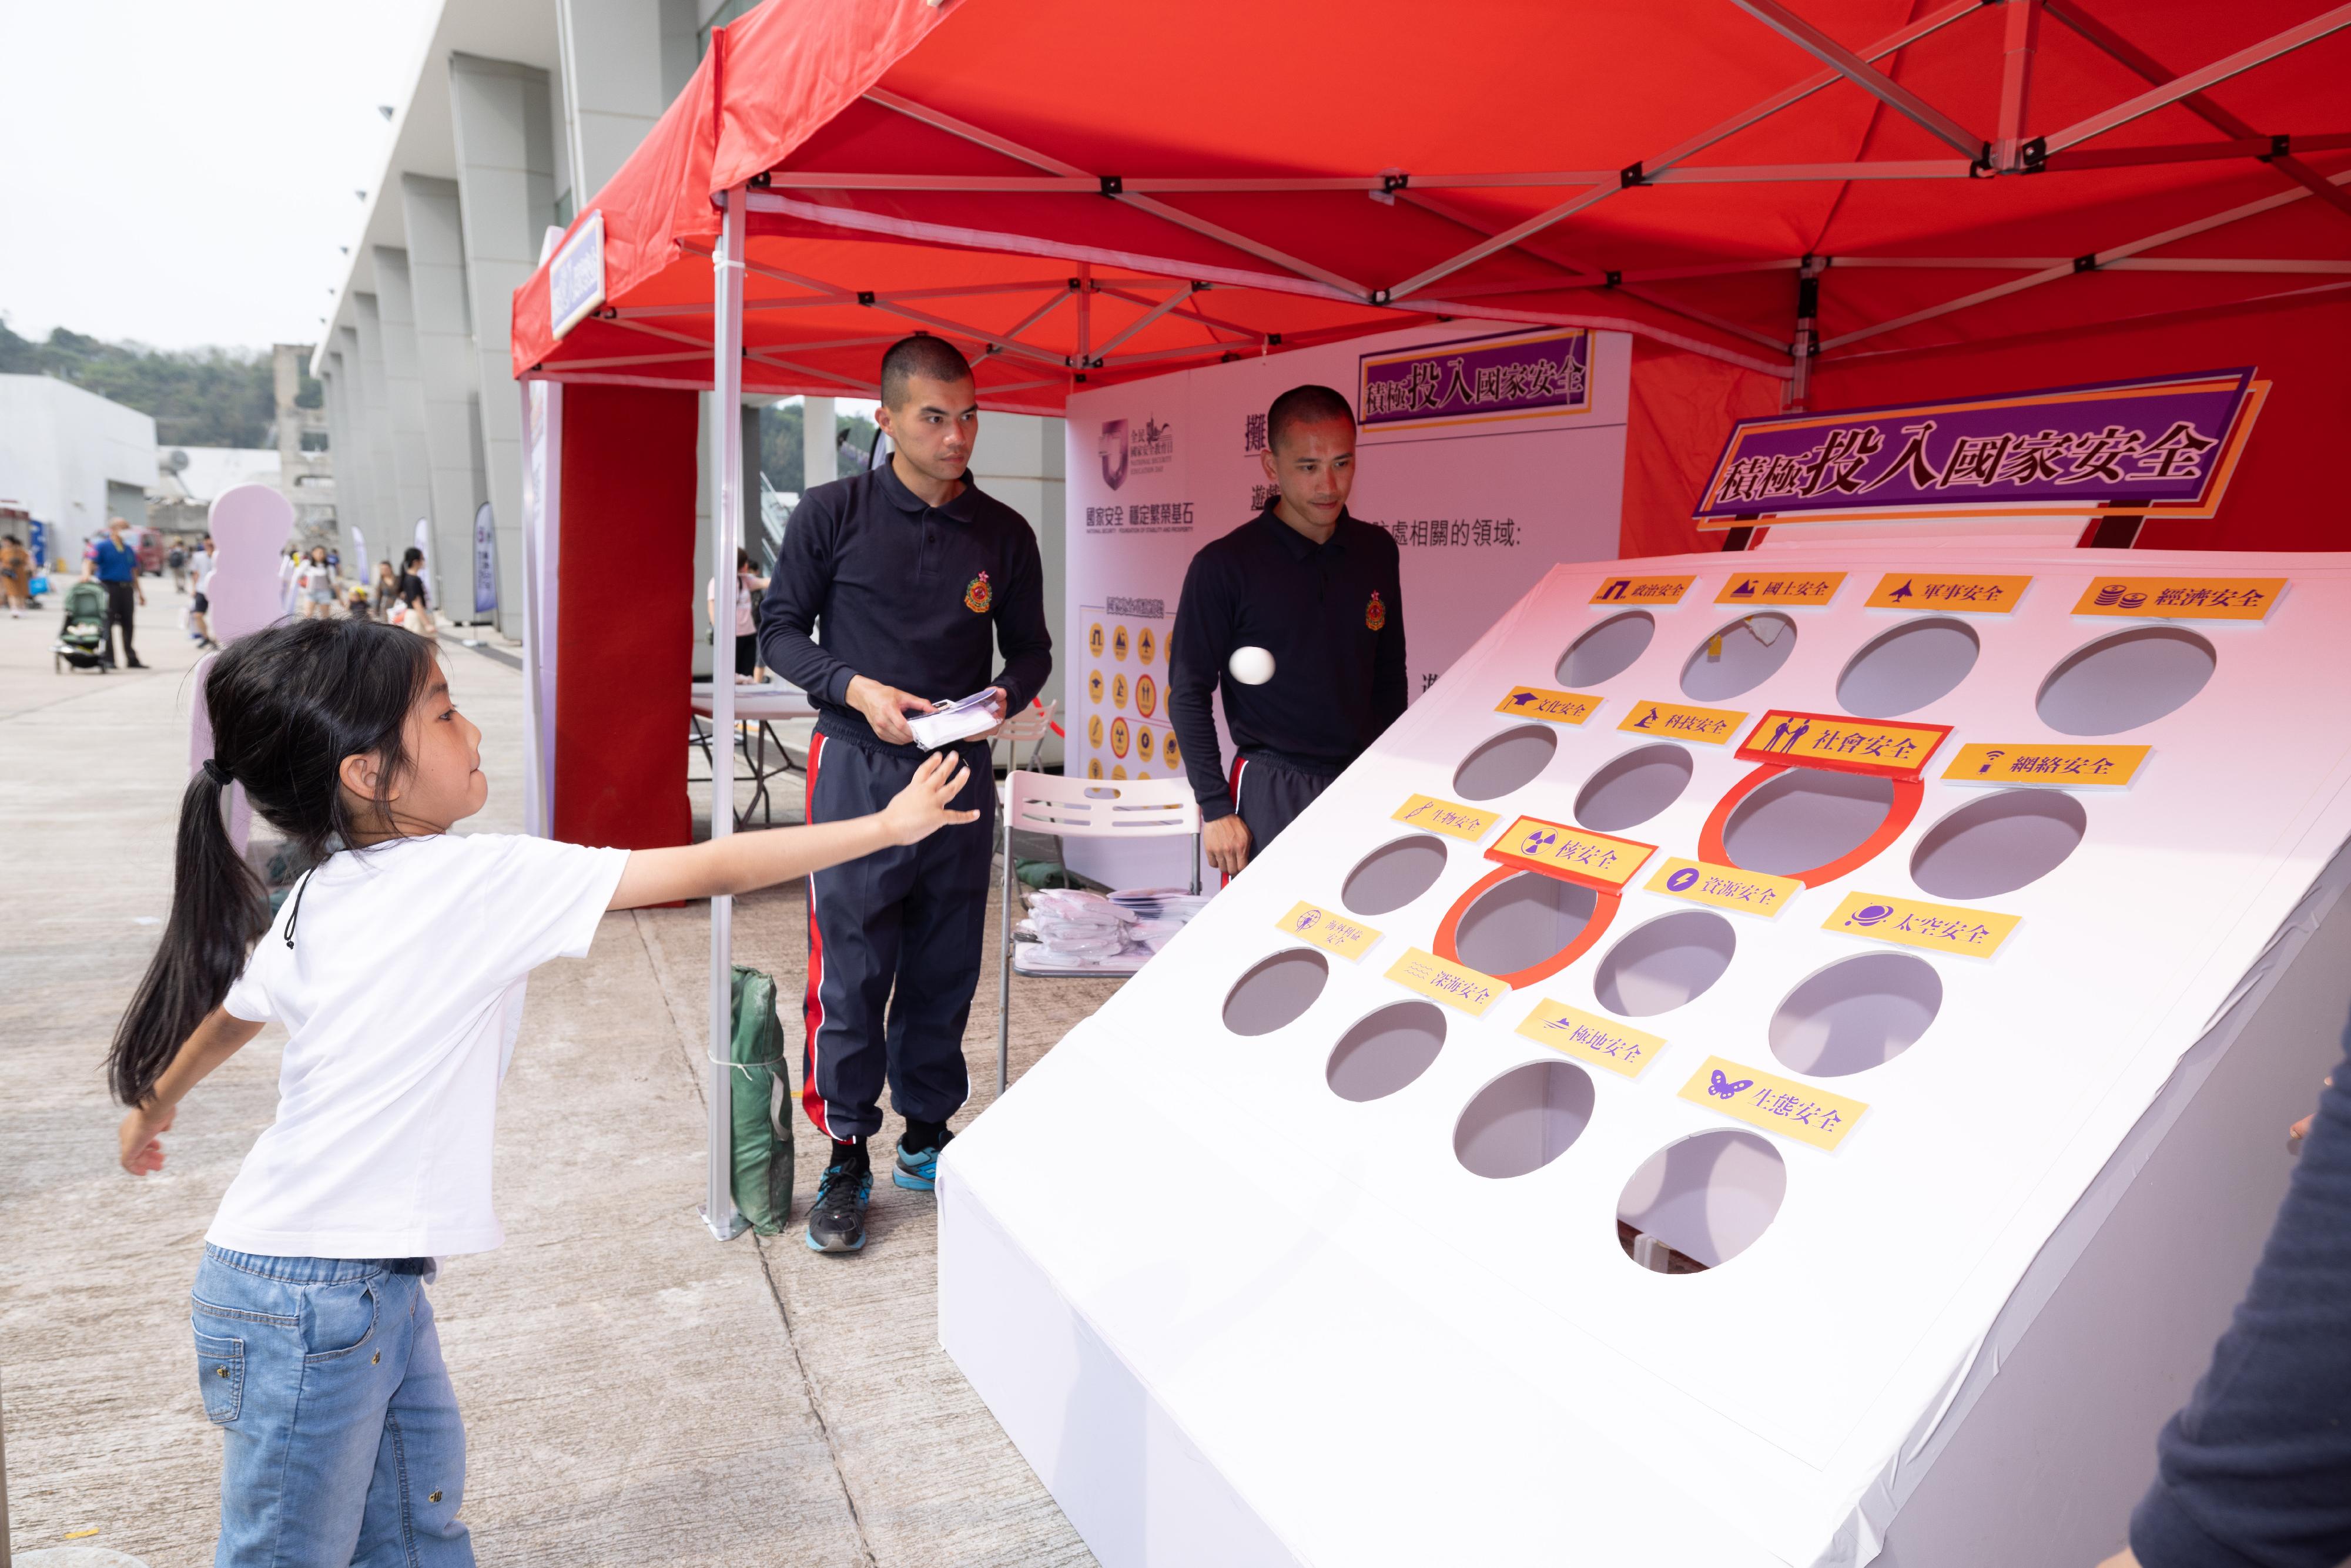 The Fire Services Department held an open day at the Fire and Ambulance Services Academy today (April 15) to introduce training facilities in the Academy. Various demonstrations, experiences and performances were arranged for the public. Photo shows a game booth on national security which enhance public understanding of the importance of national security through interactive engagement.